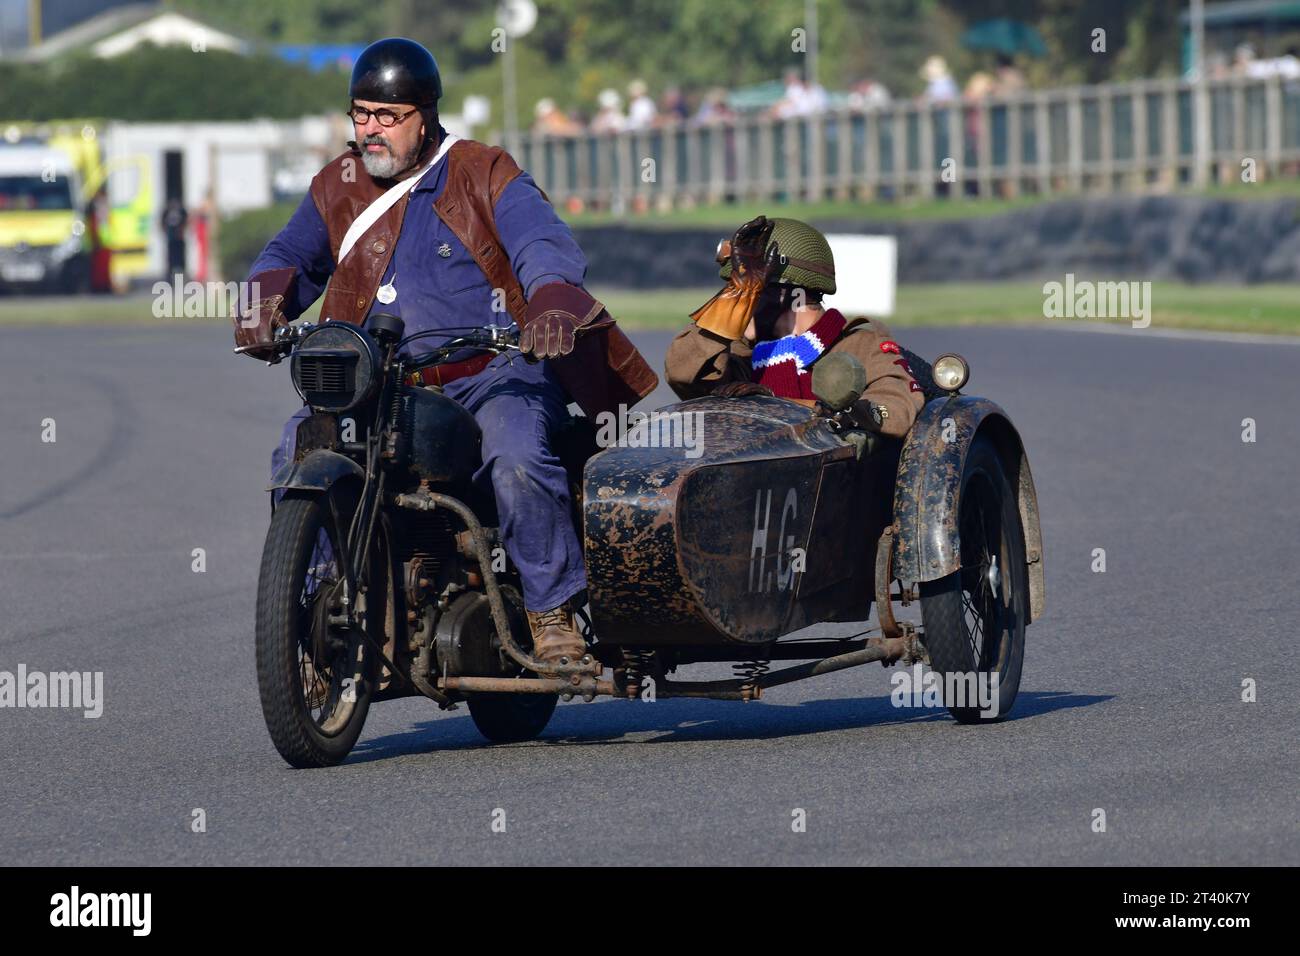 1943 Royal Enfield Motorcyle and sidecar combination, Track Parade - Motorcycle Celebration, circa 200 bikes featured in the morning parade laps, incl Stock Photo